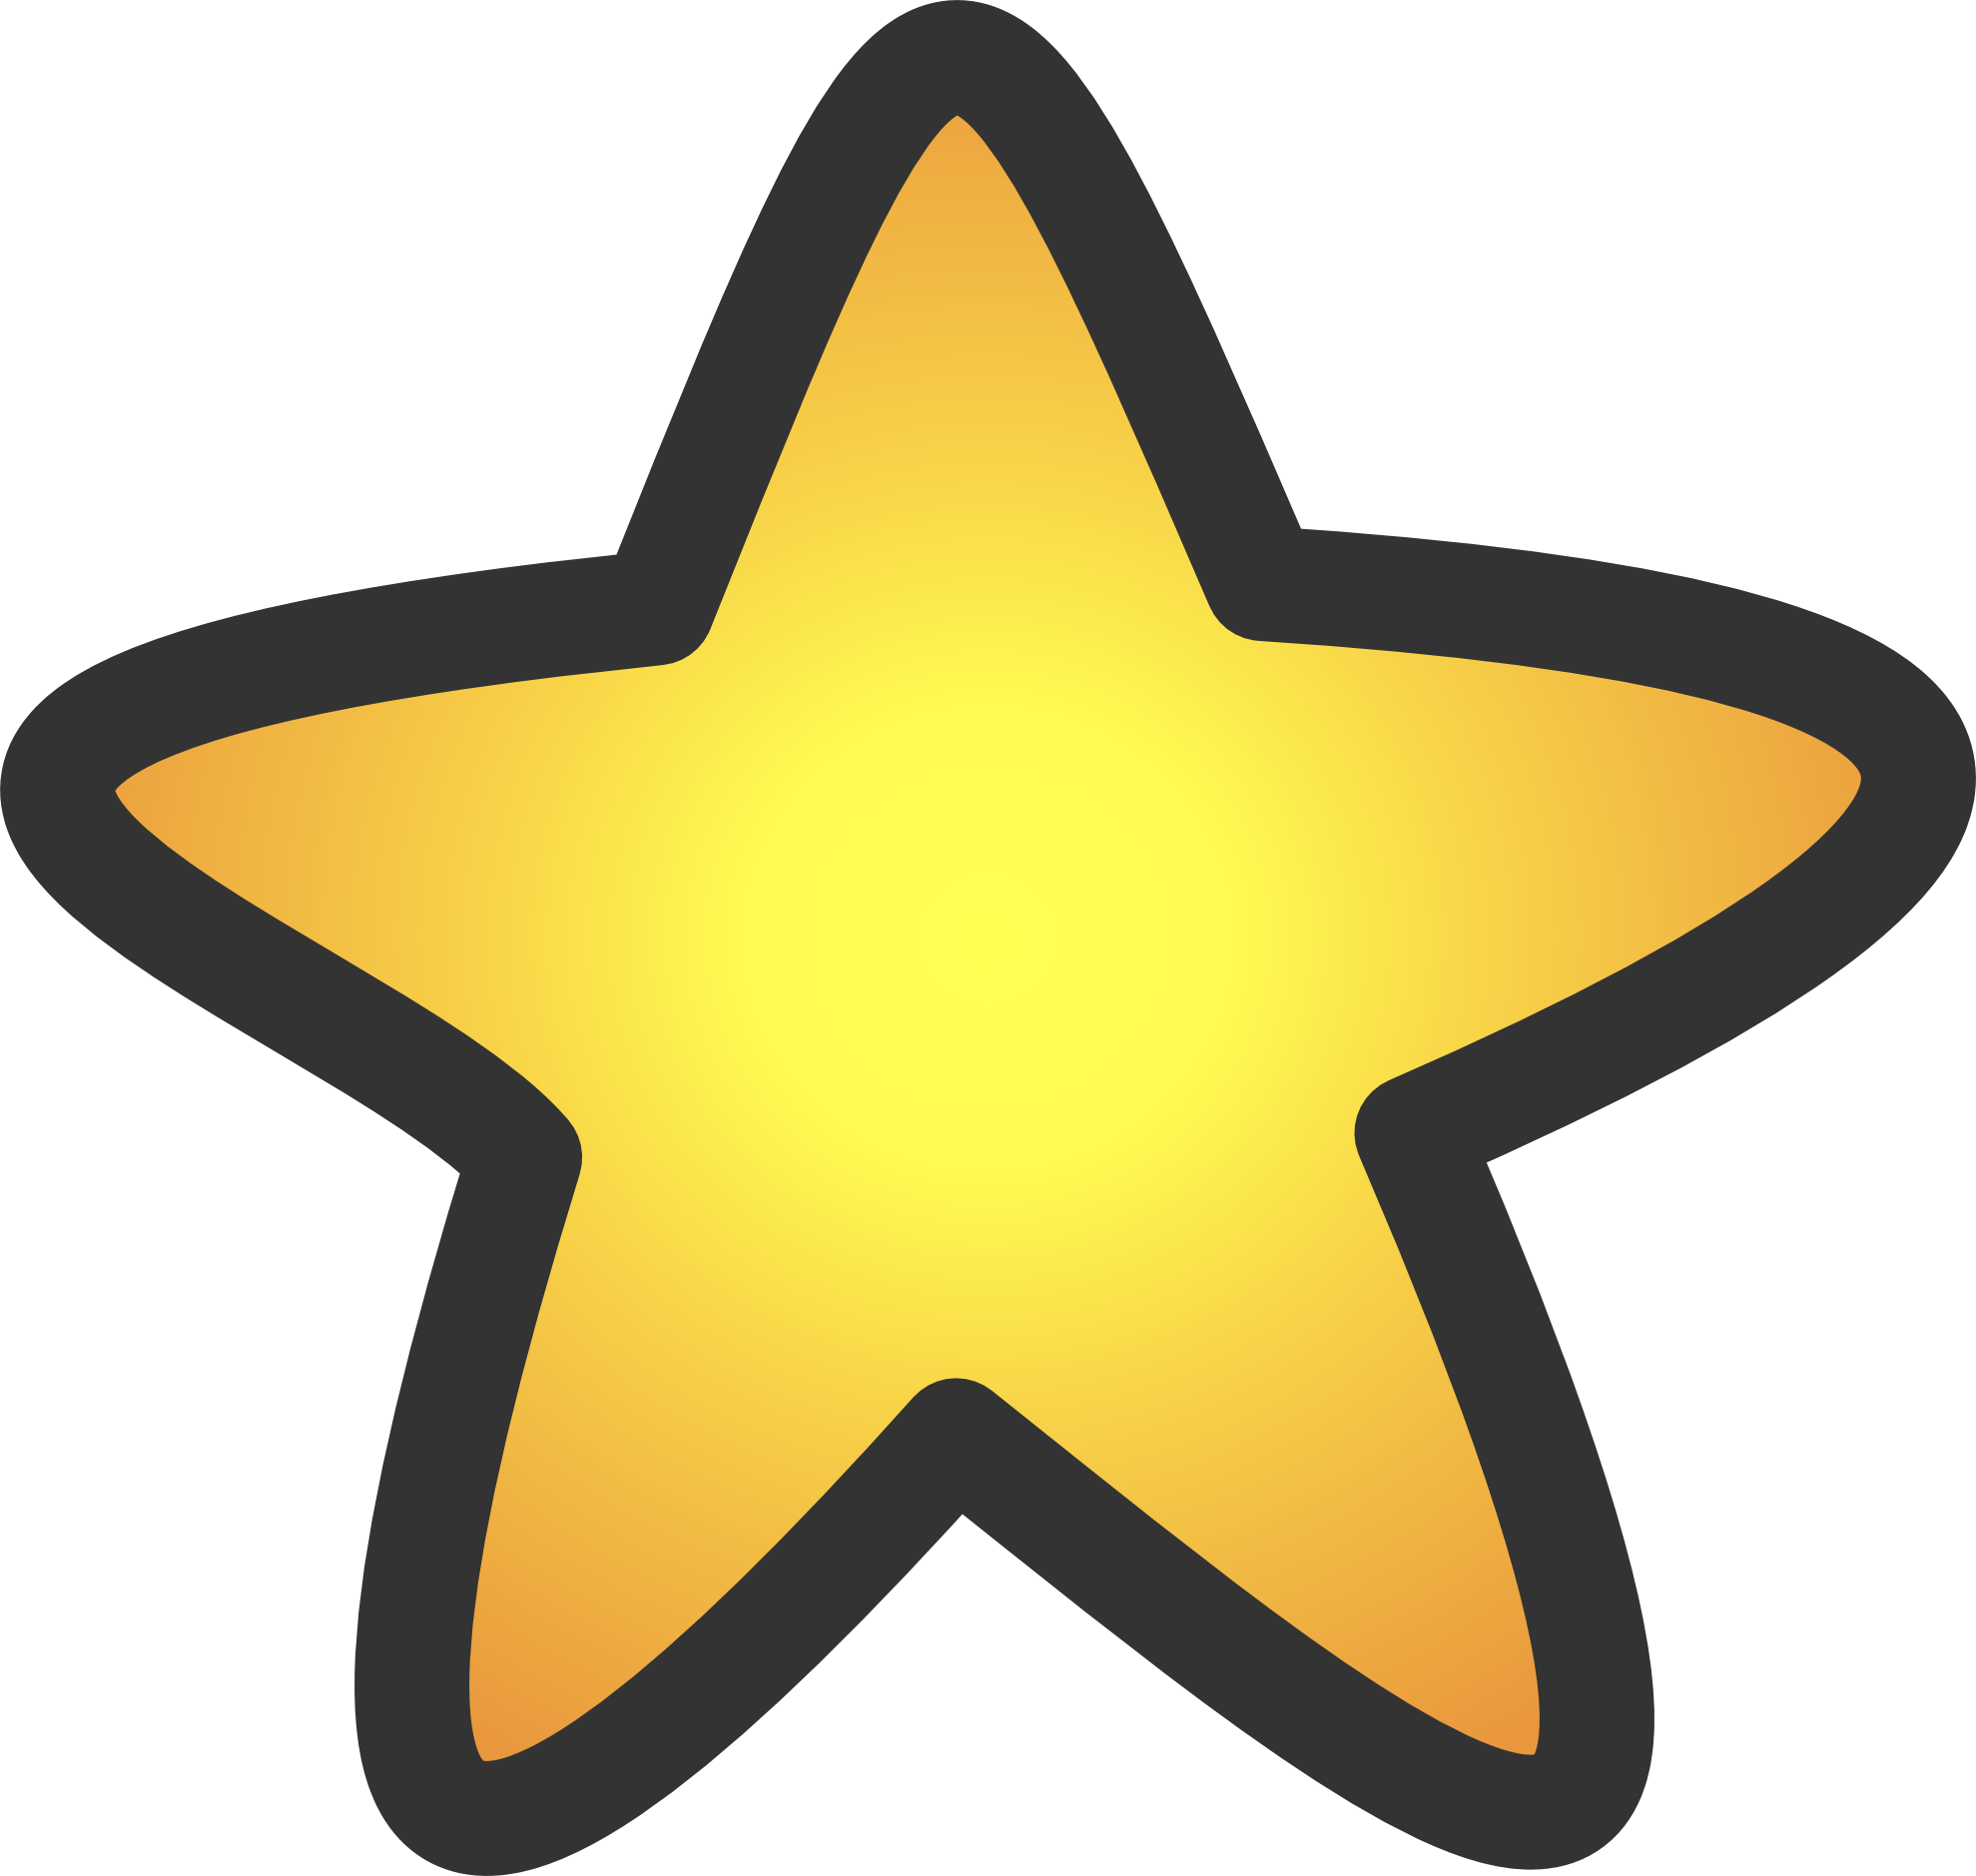 free-gold-star-image-download-free-clip-art-free-clip-art-on-clipart